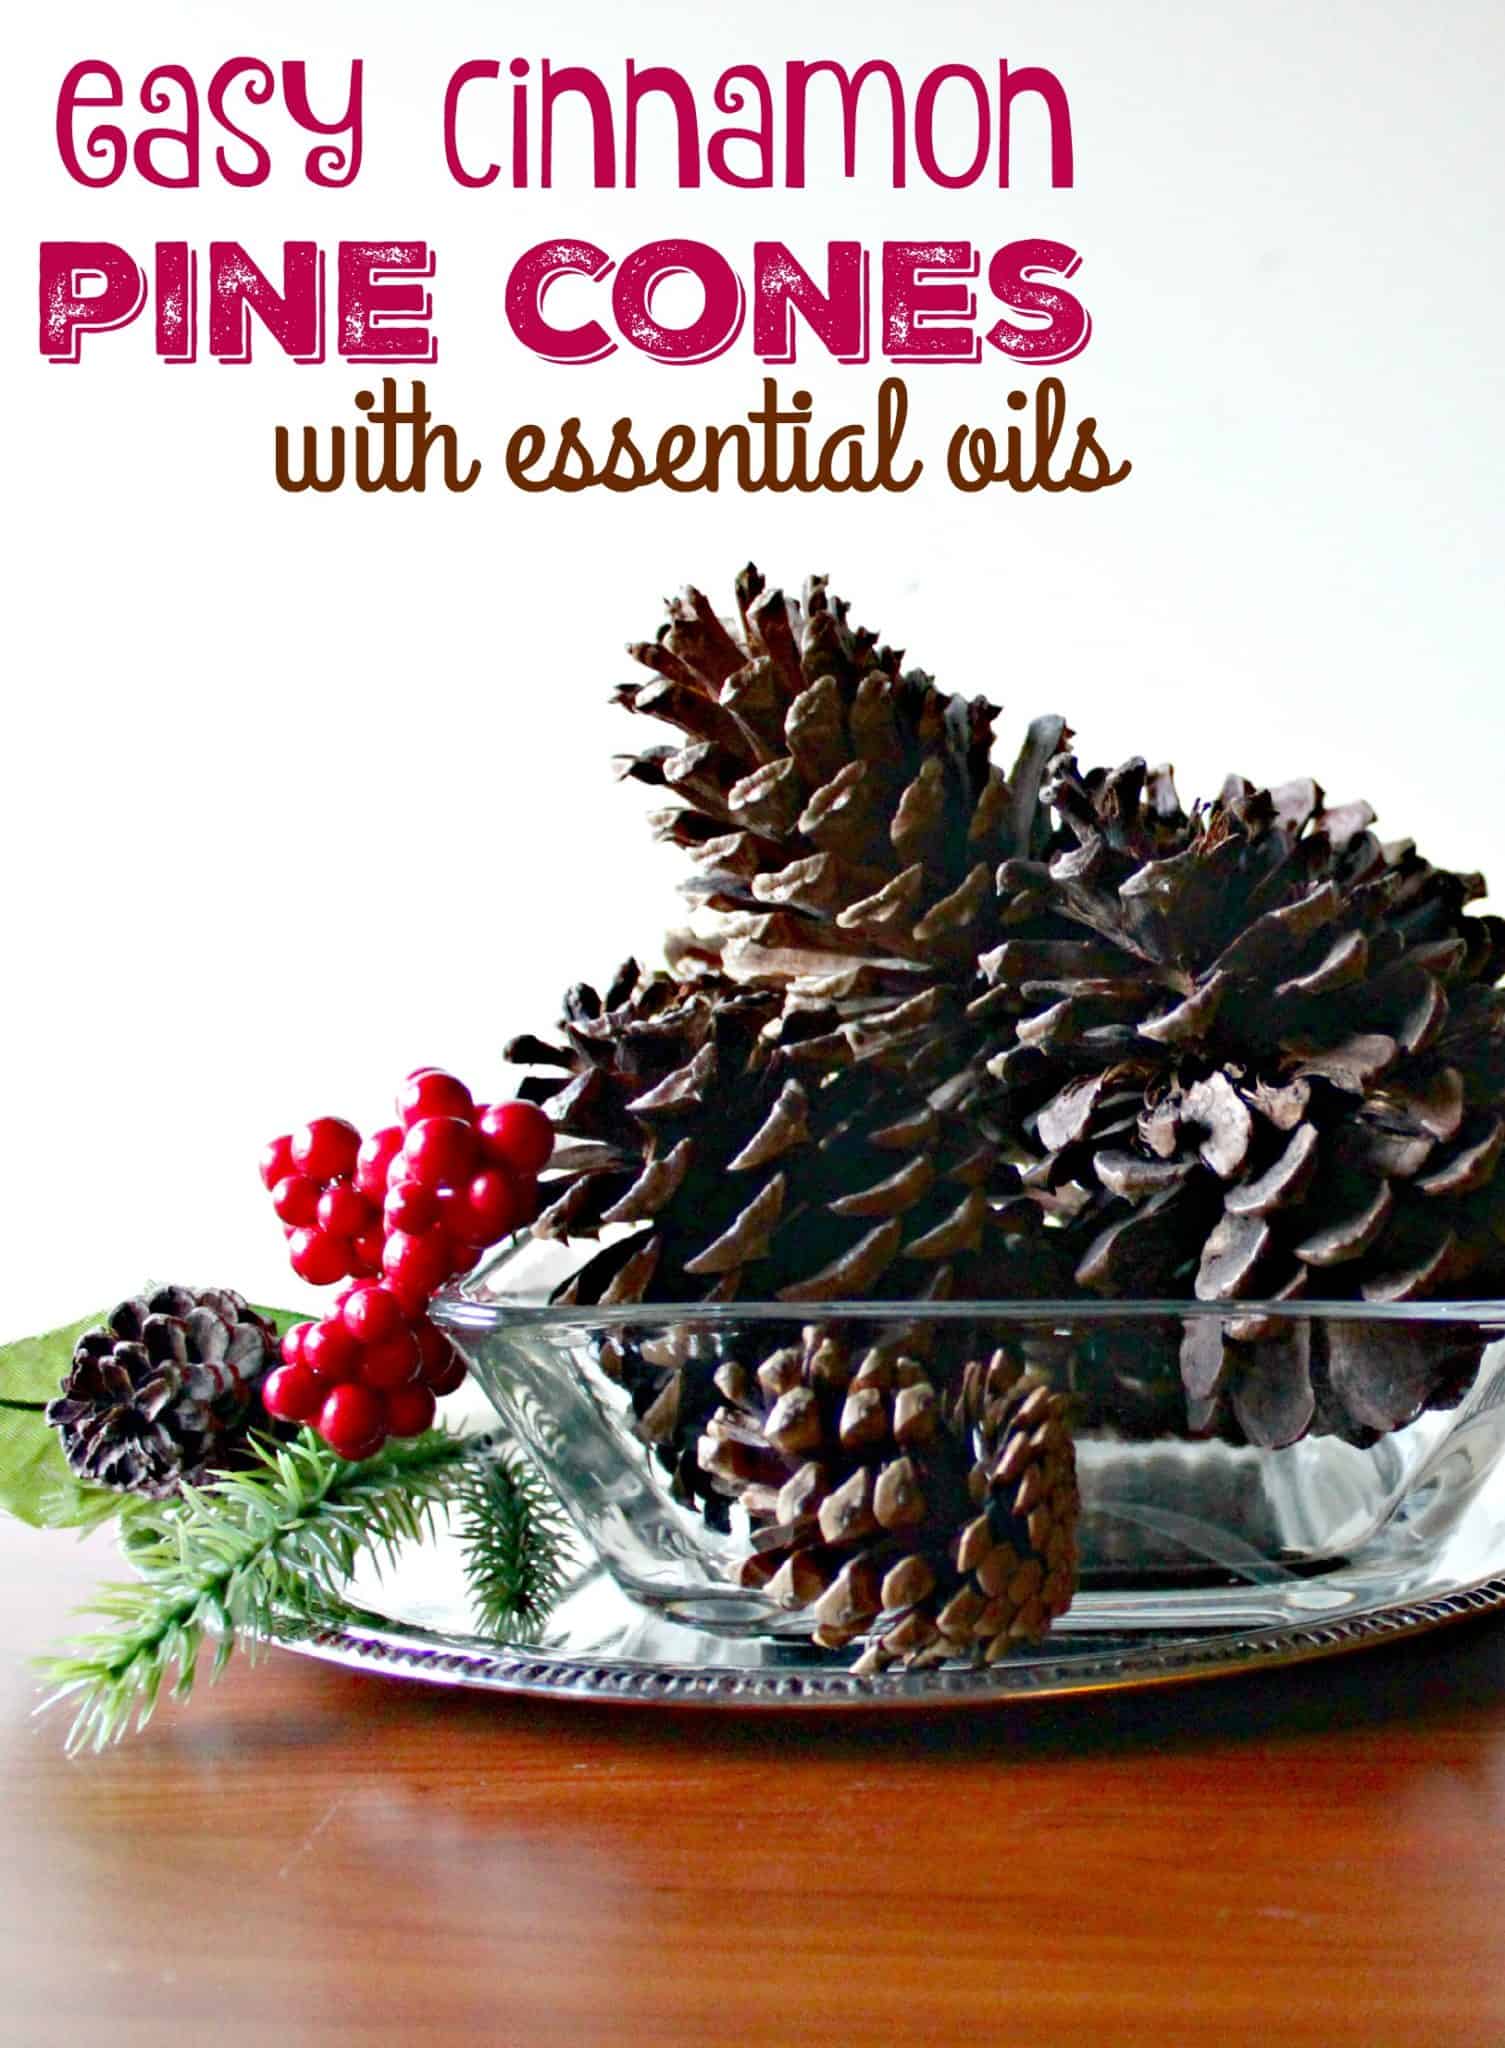 These easy cinnamon pinecones use essential oils to make your home smell like the holidays. And, they make a festive centerpiece as well.